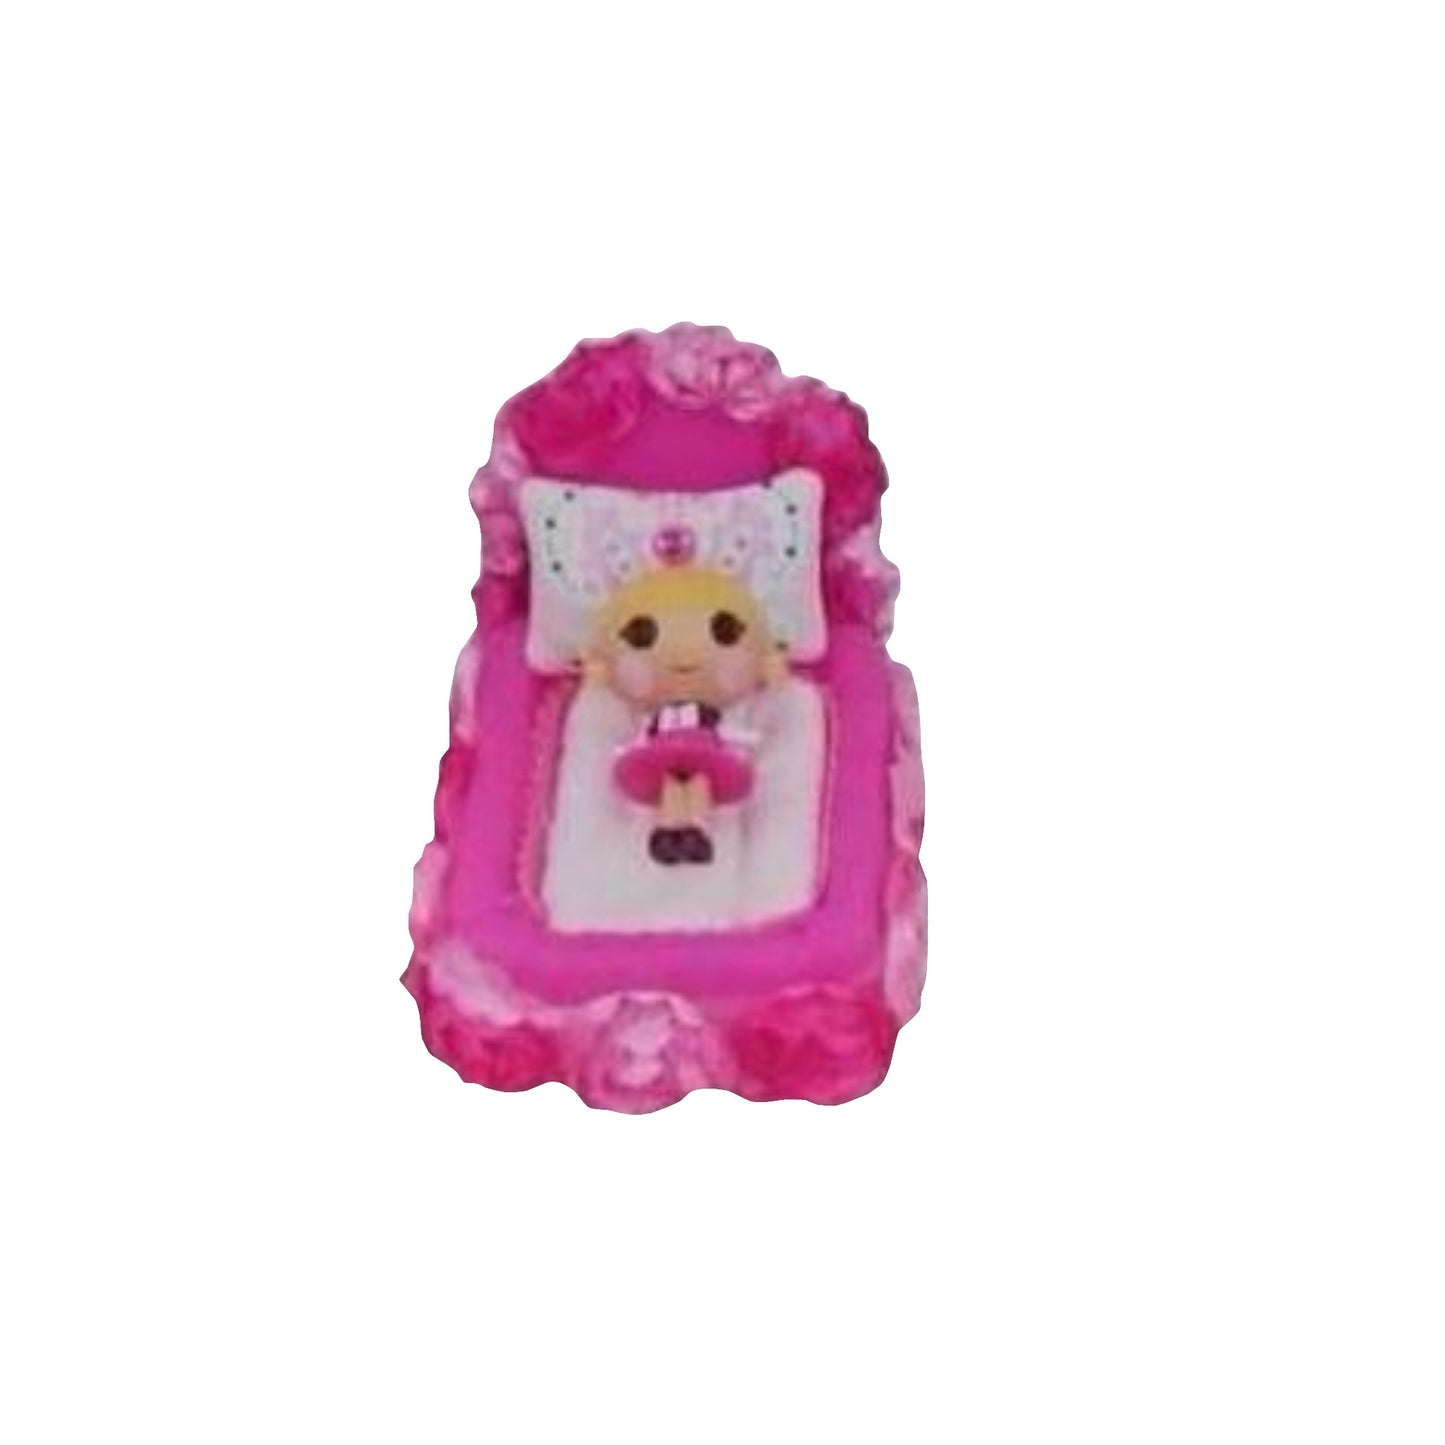 Upholstered Bright Pink Floral Doll Bed for 1 5/8-inch dolls